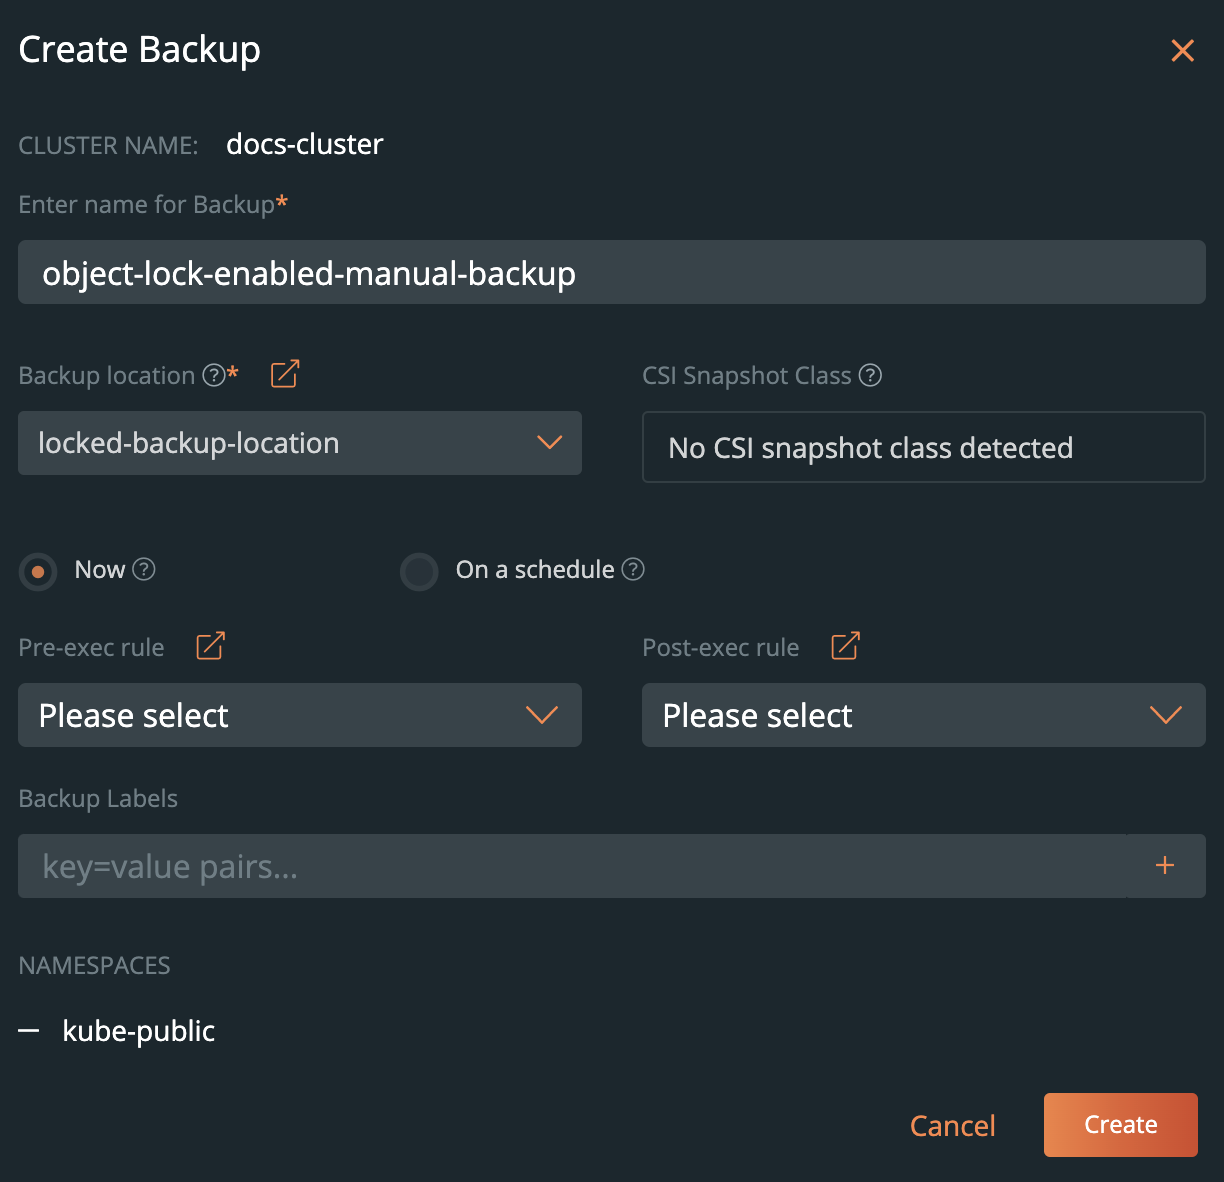 create an object lock enabled manual backup